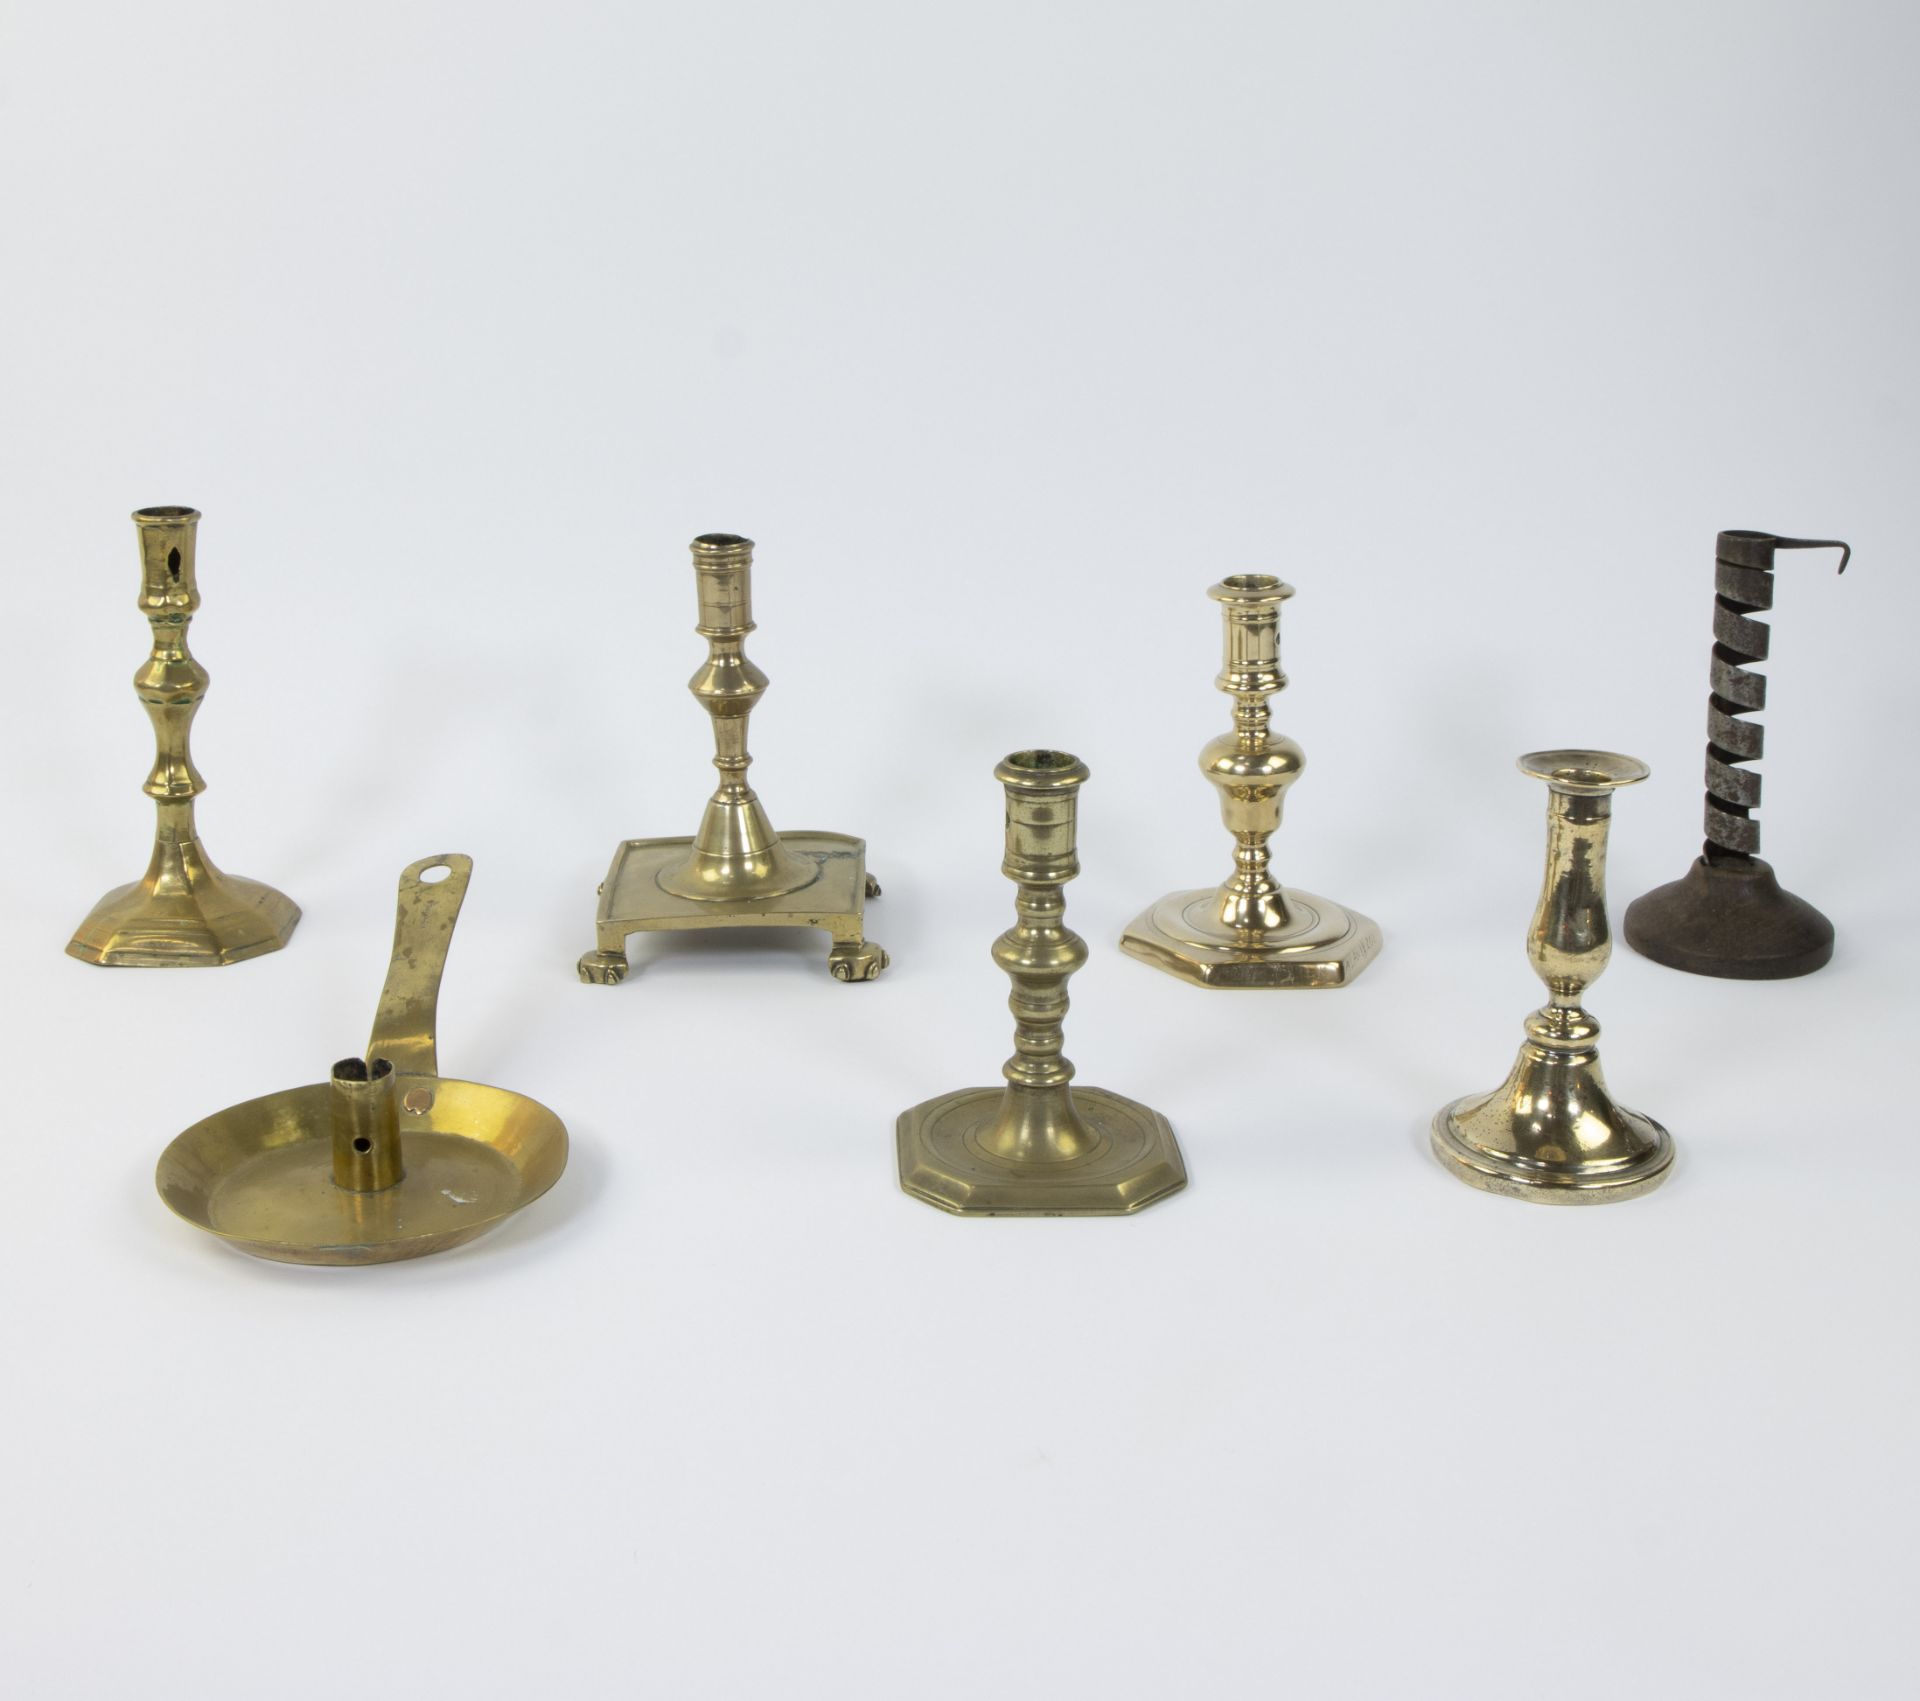 Collection of candlesticks, brass and iron, 17th/18th century, Western European (Spanish, French, Du